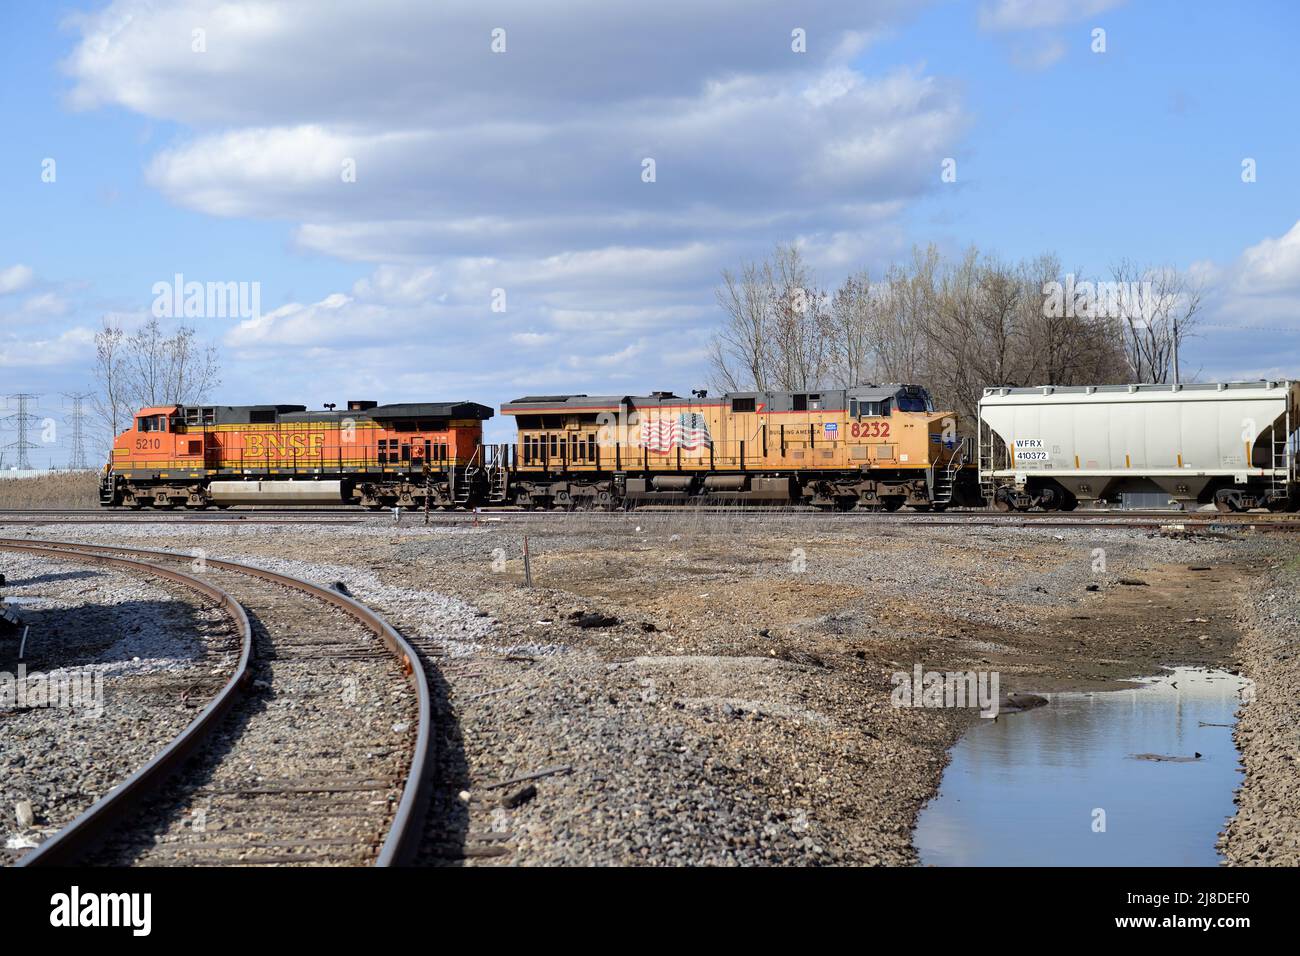 Elgin, Illinois, USA. Two off-road, run-through locomotives, lead a freight train through a railroad junction west of Chicago. Stock Photo